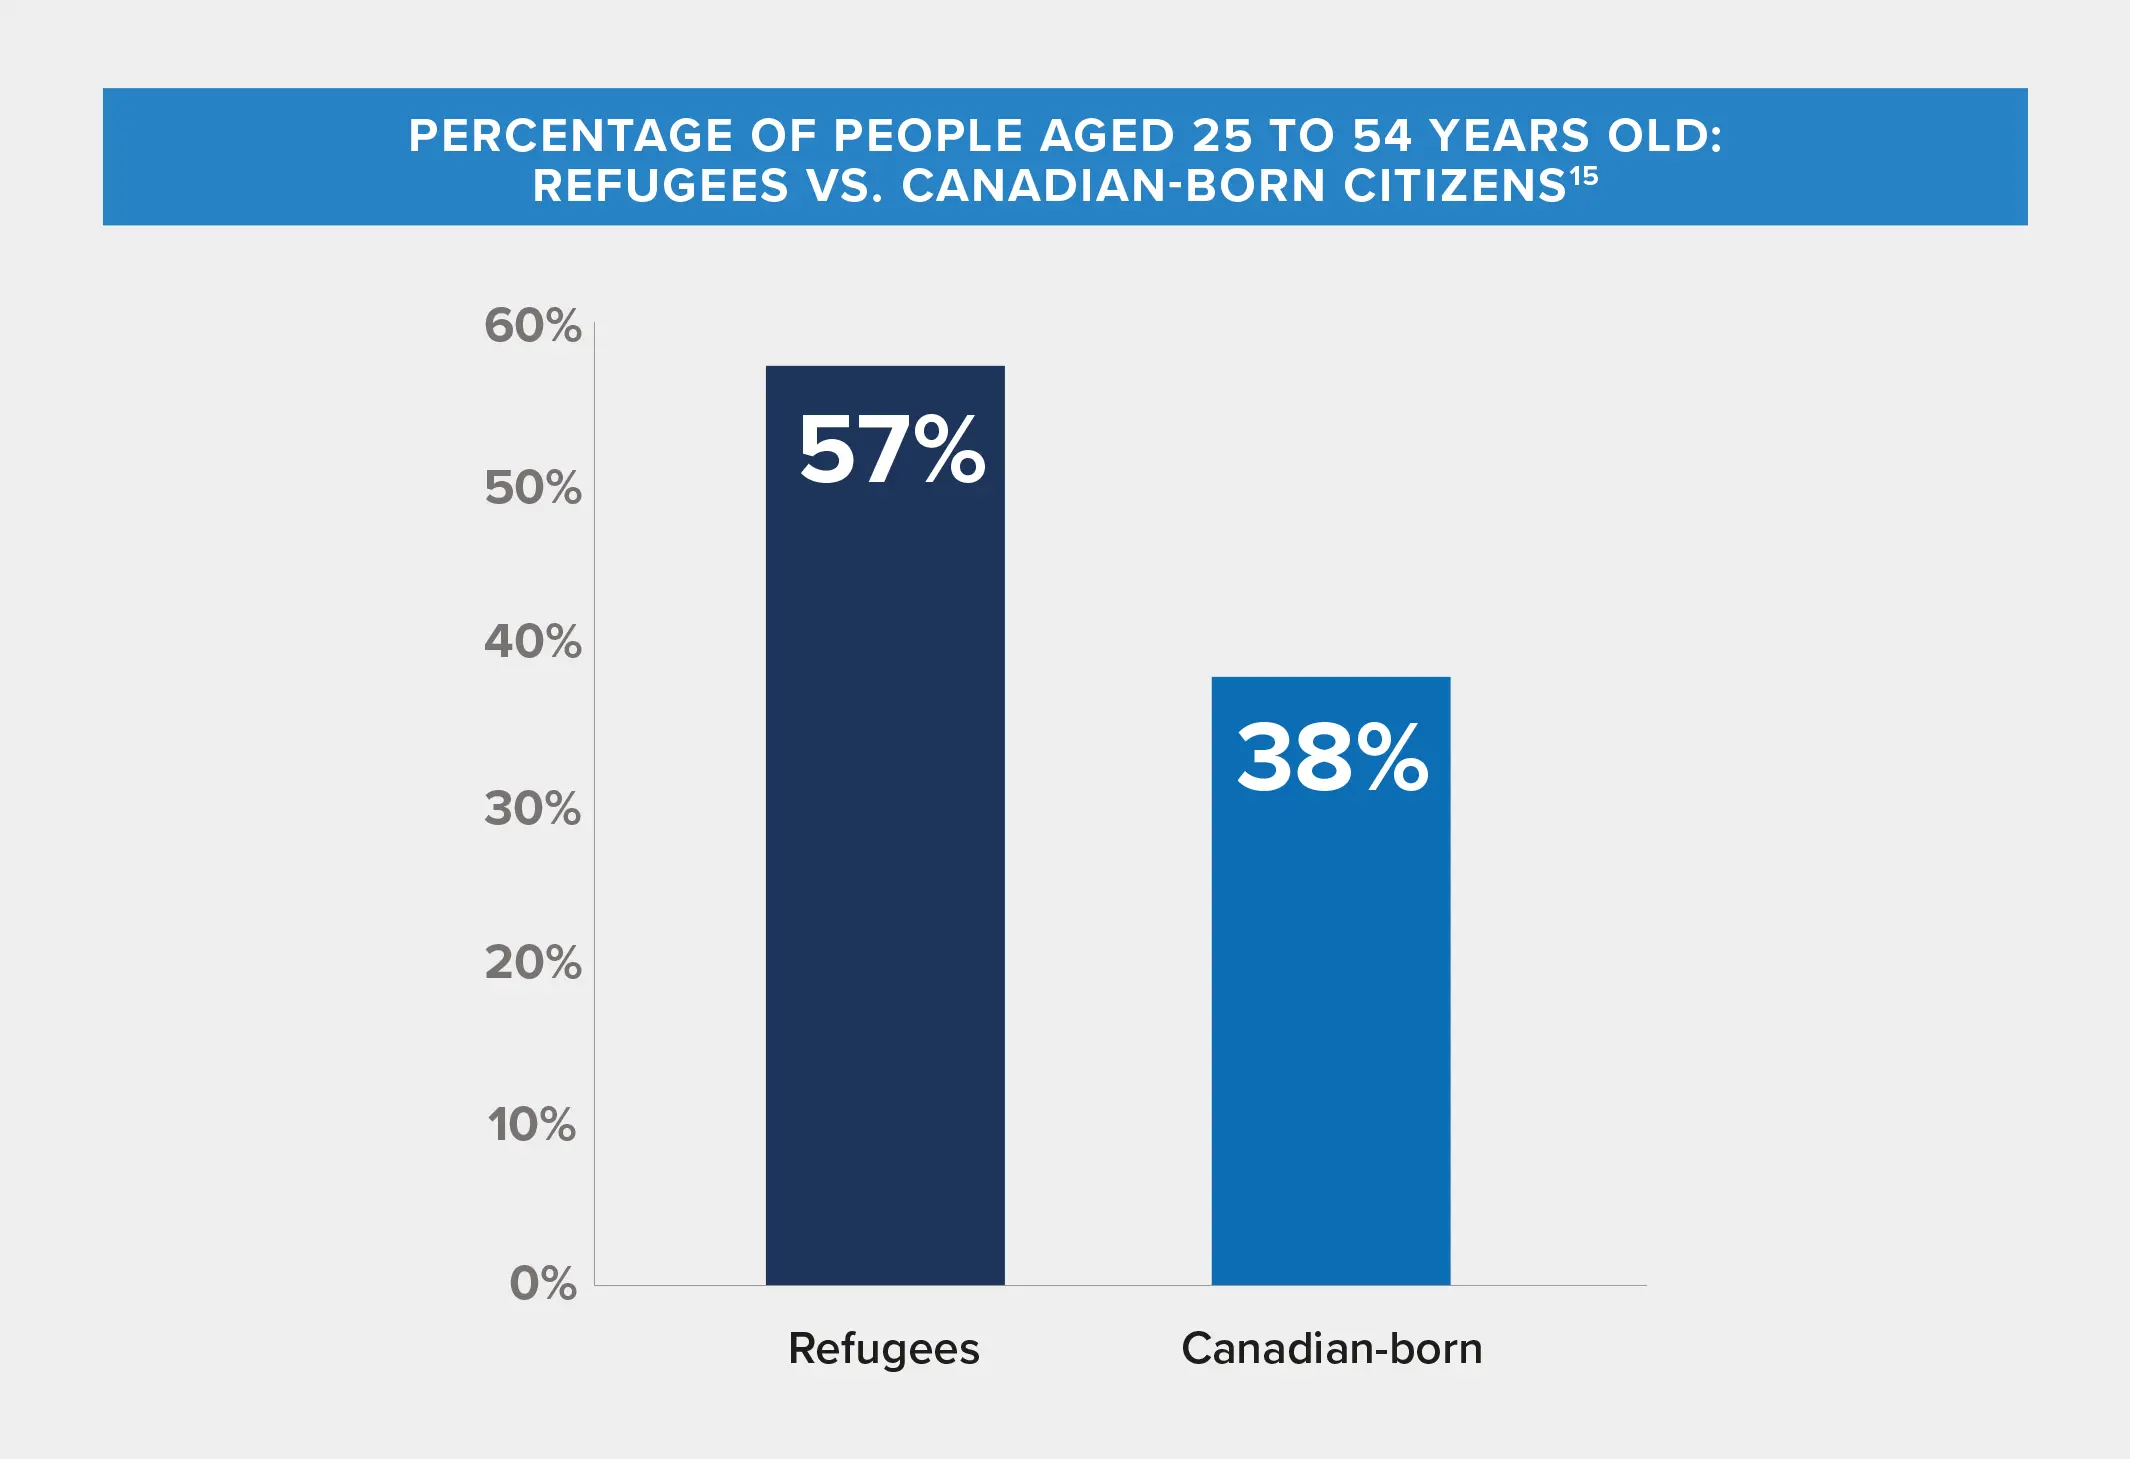 Graph showing the percentage of people aged between 25 and 54 years old, refugees versus Canadian-born citizens.